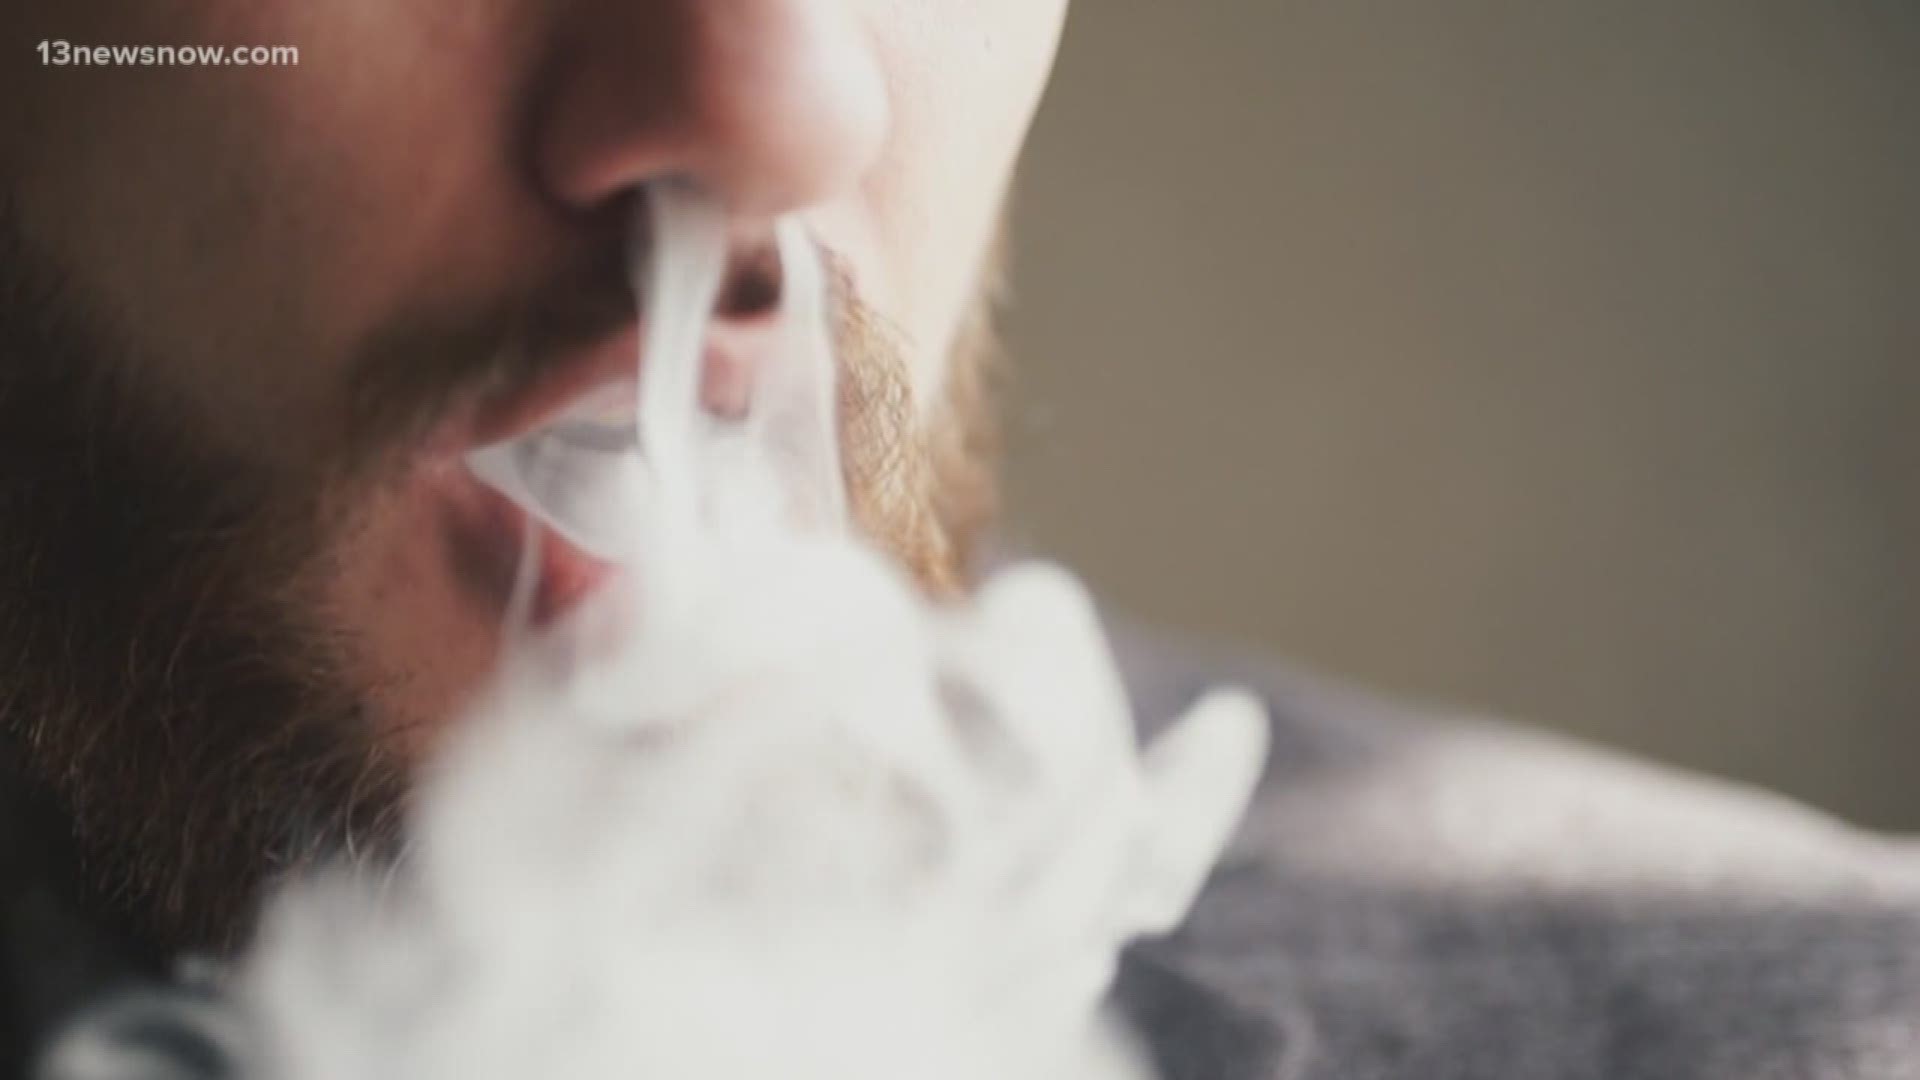 For the first time in Virginia, three people have been diagnosed with lung disease linked to vaping or e-cigarettes.